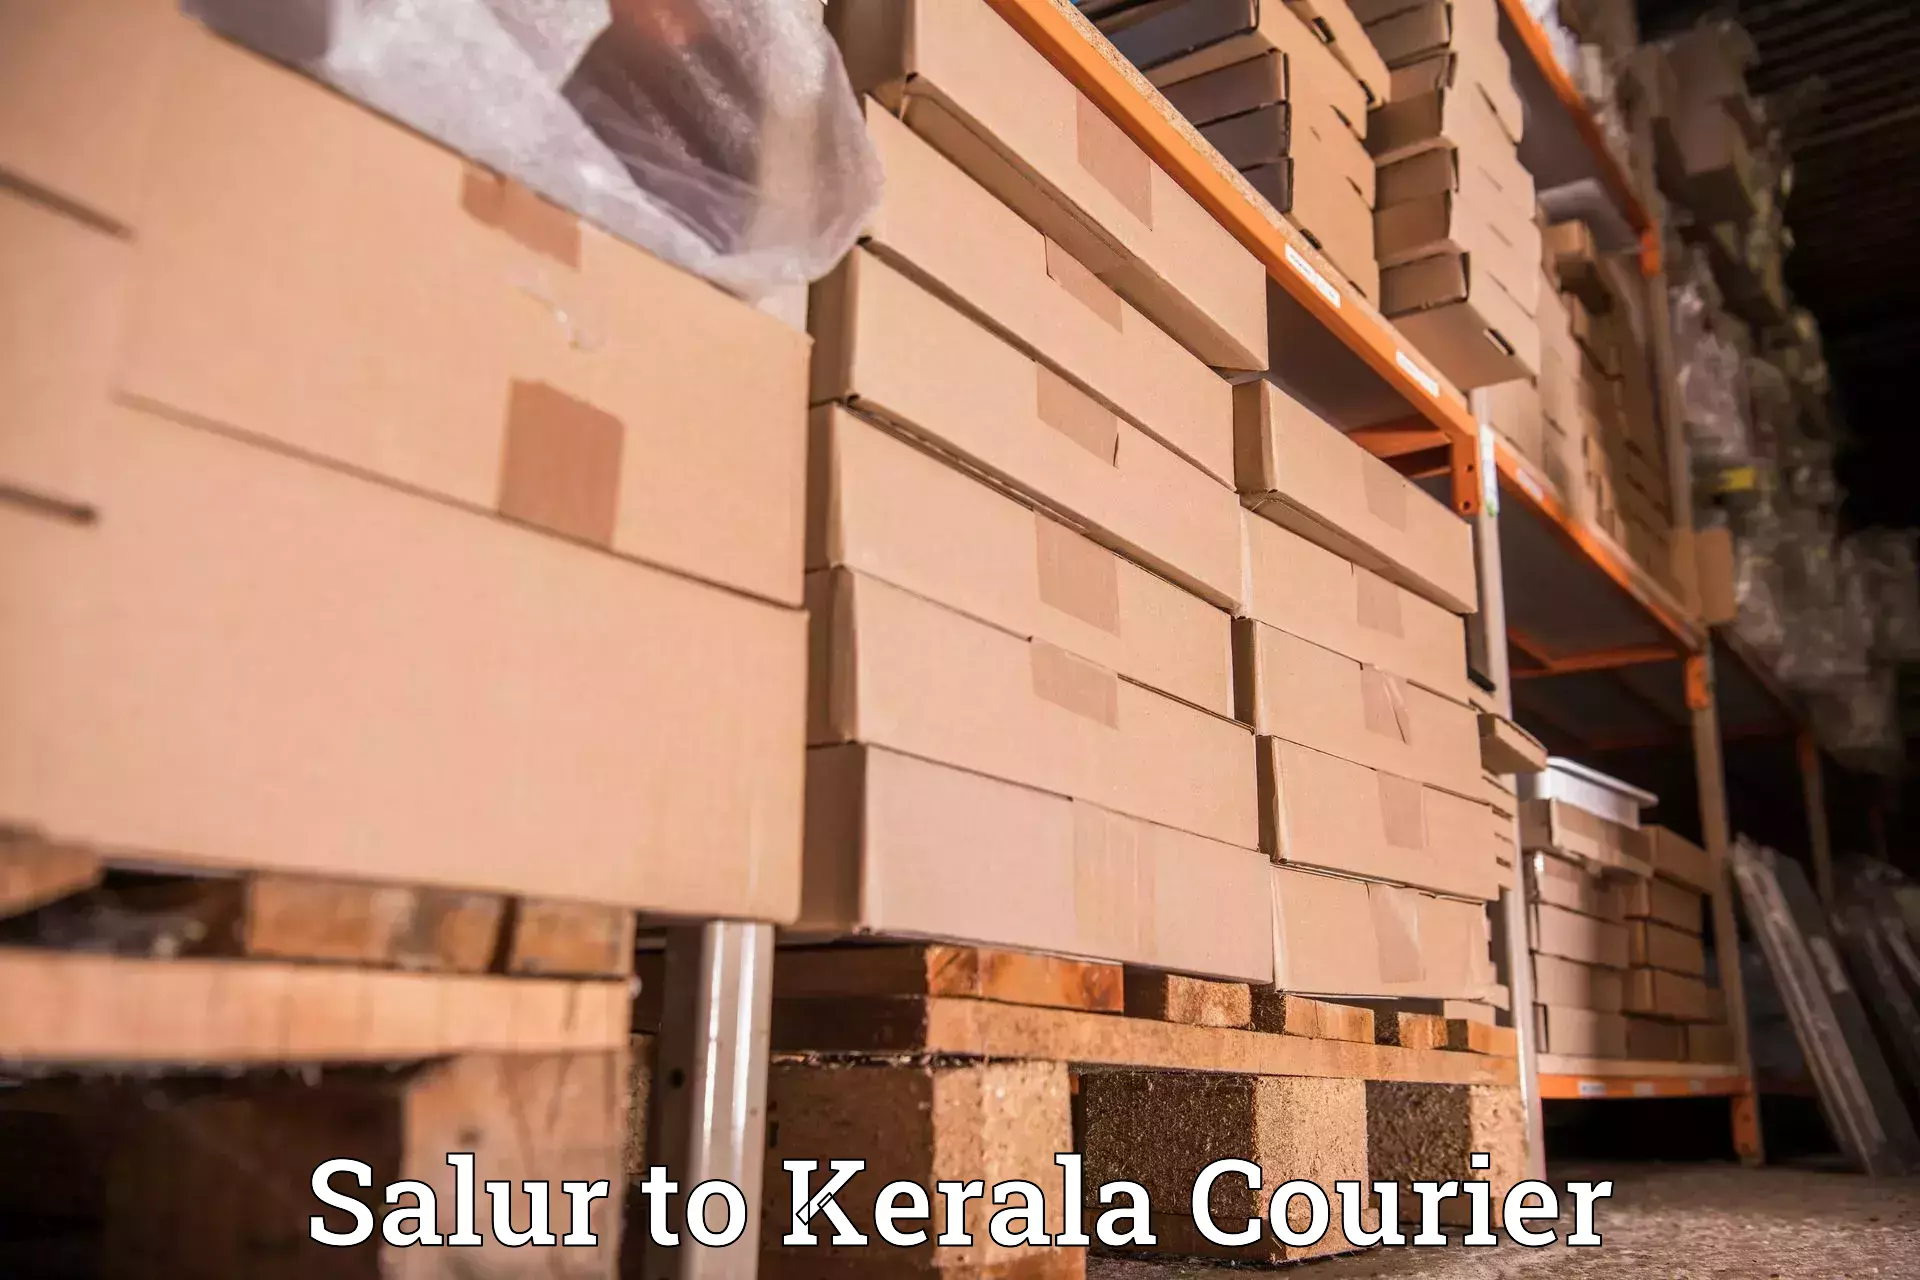 Express delivery capabilities Salur to Malappuram